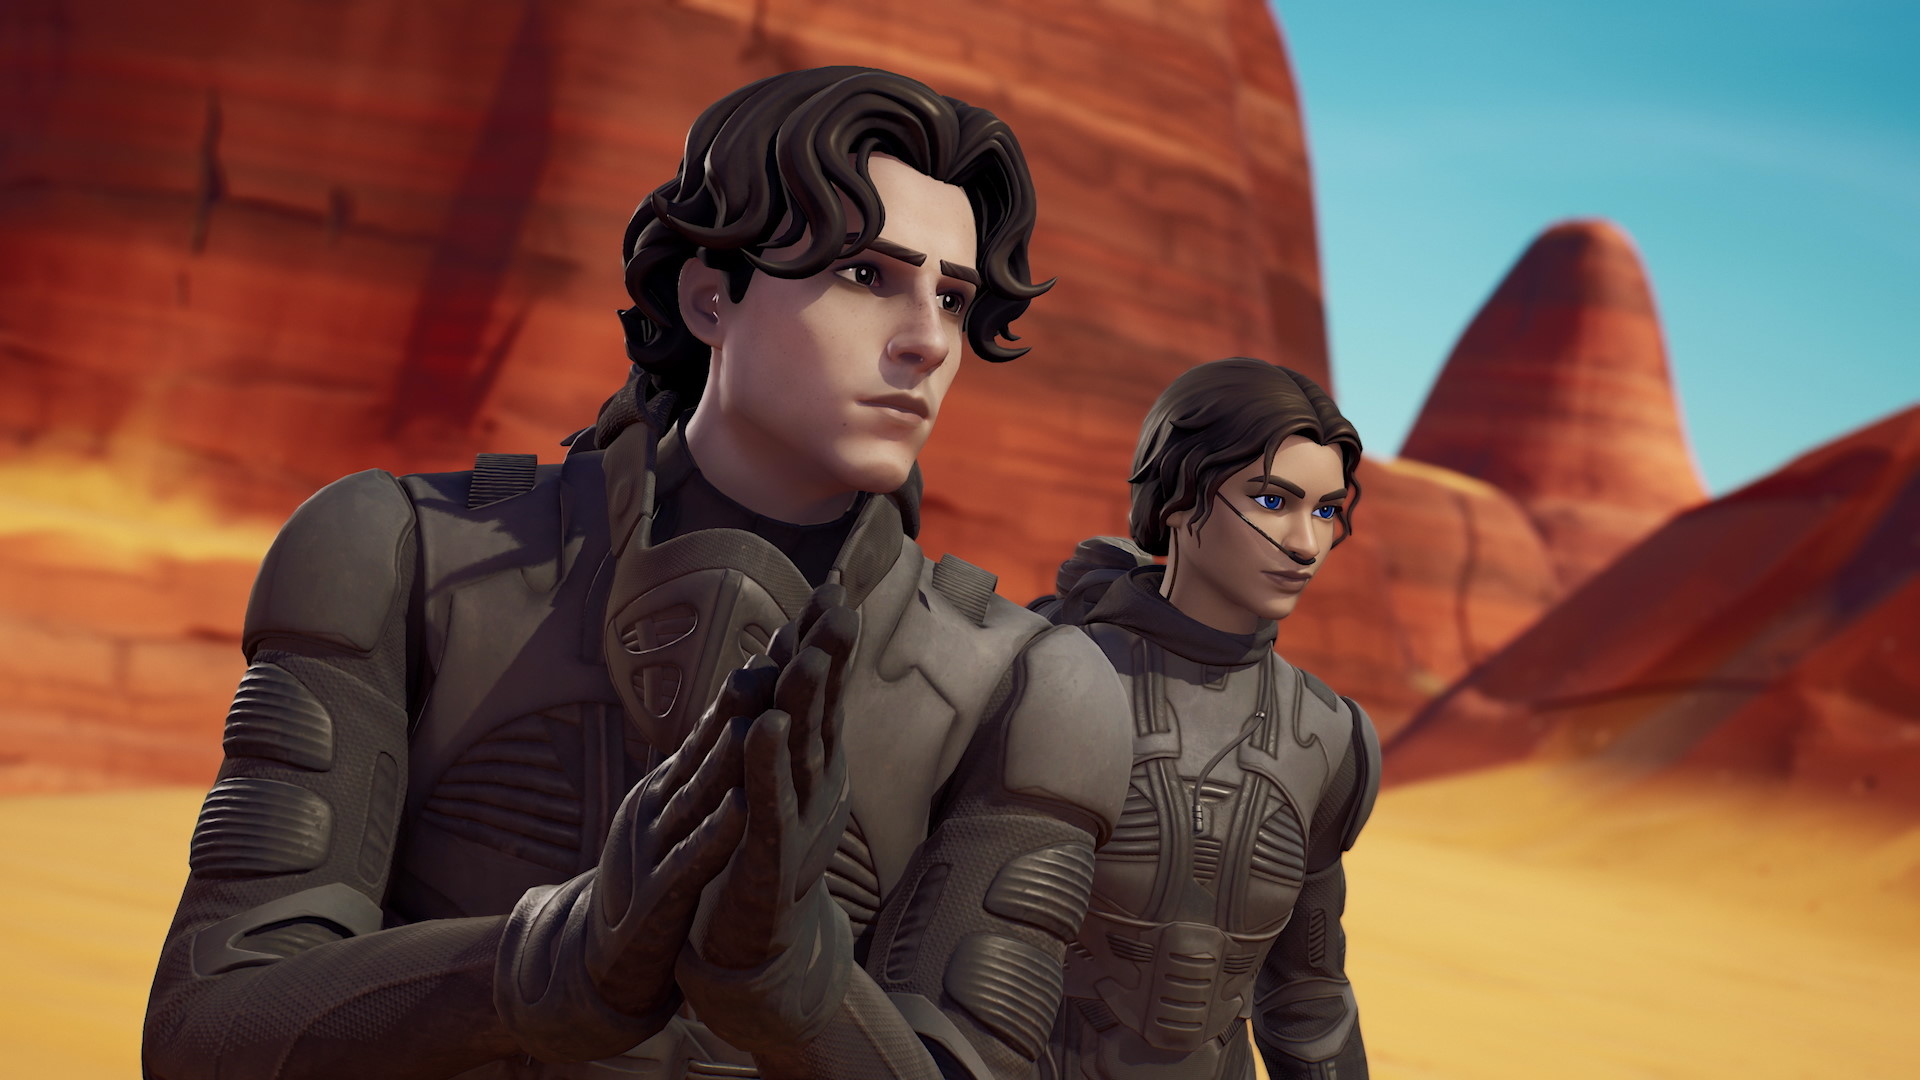  Fortnite's Dune crossover features the goofiest looking sandworm ever 